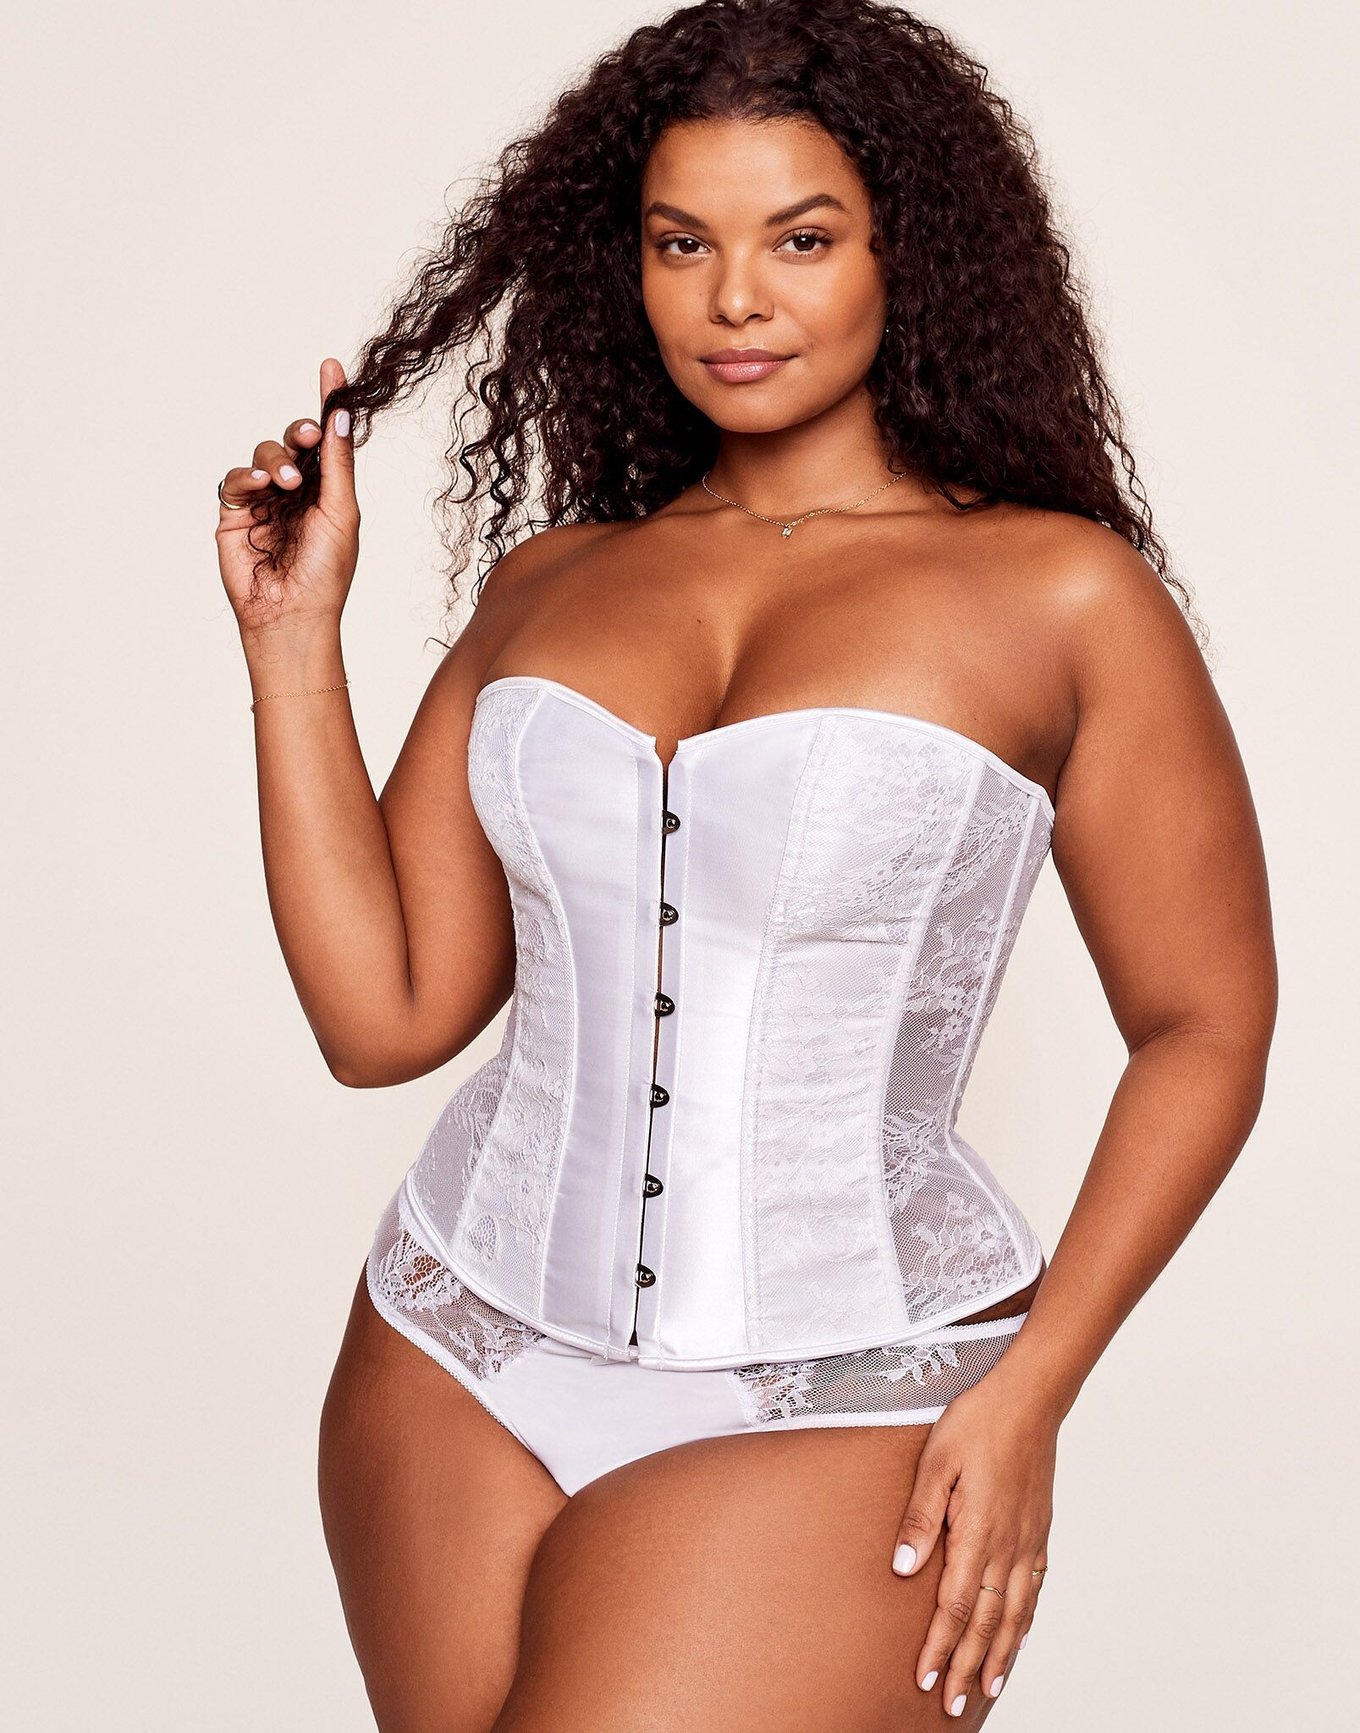 Corset with String on Woman Body · Free Stock Photo